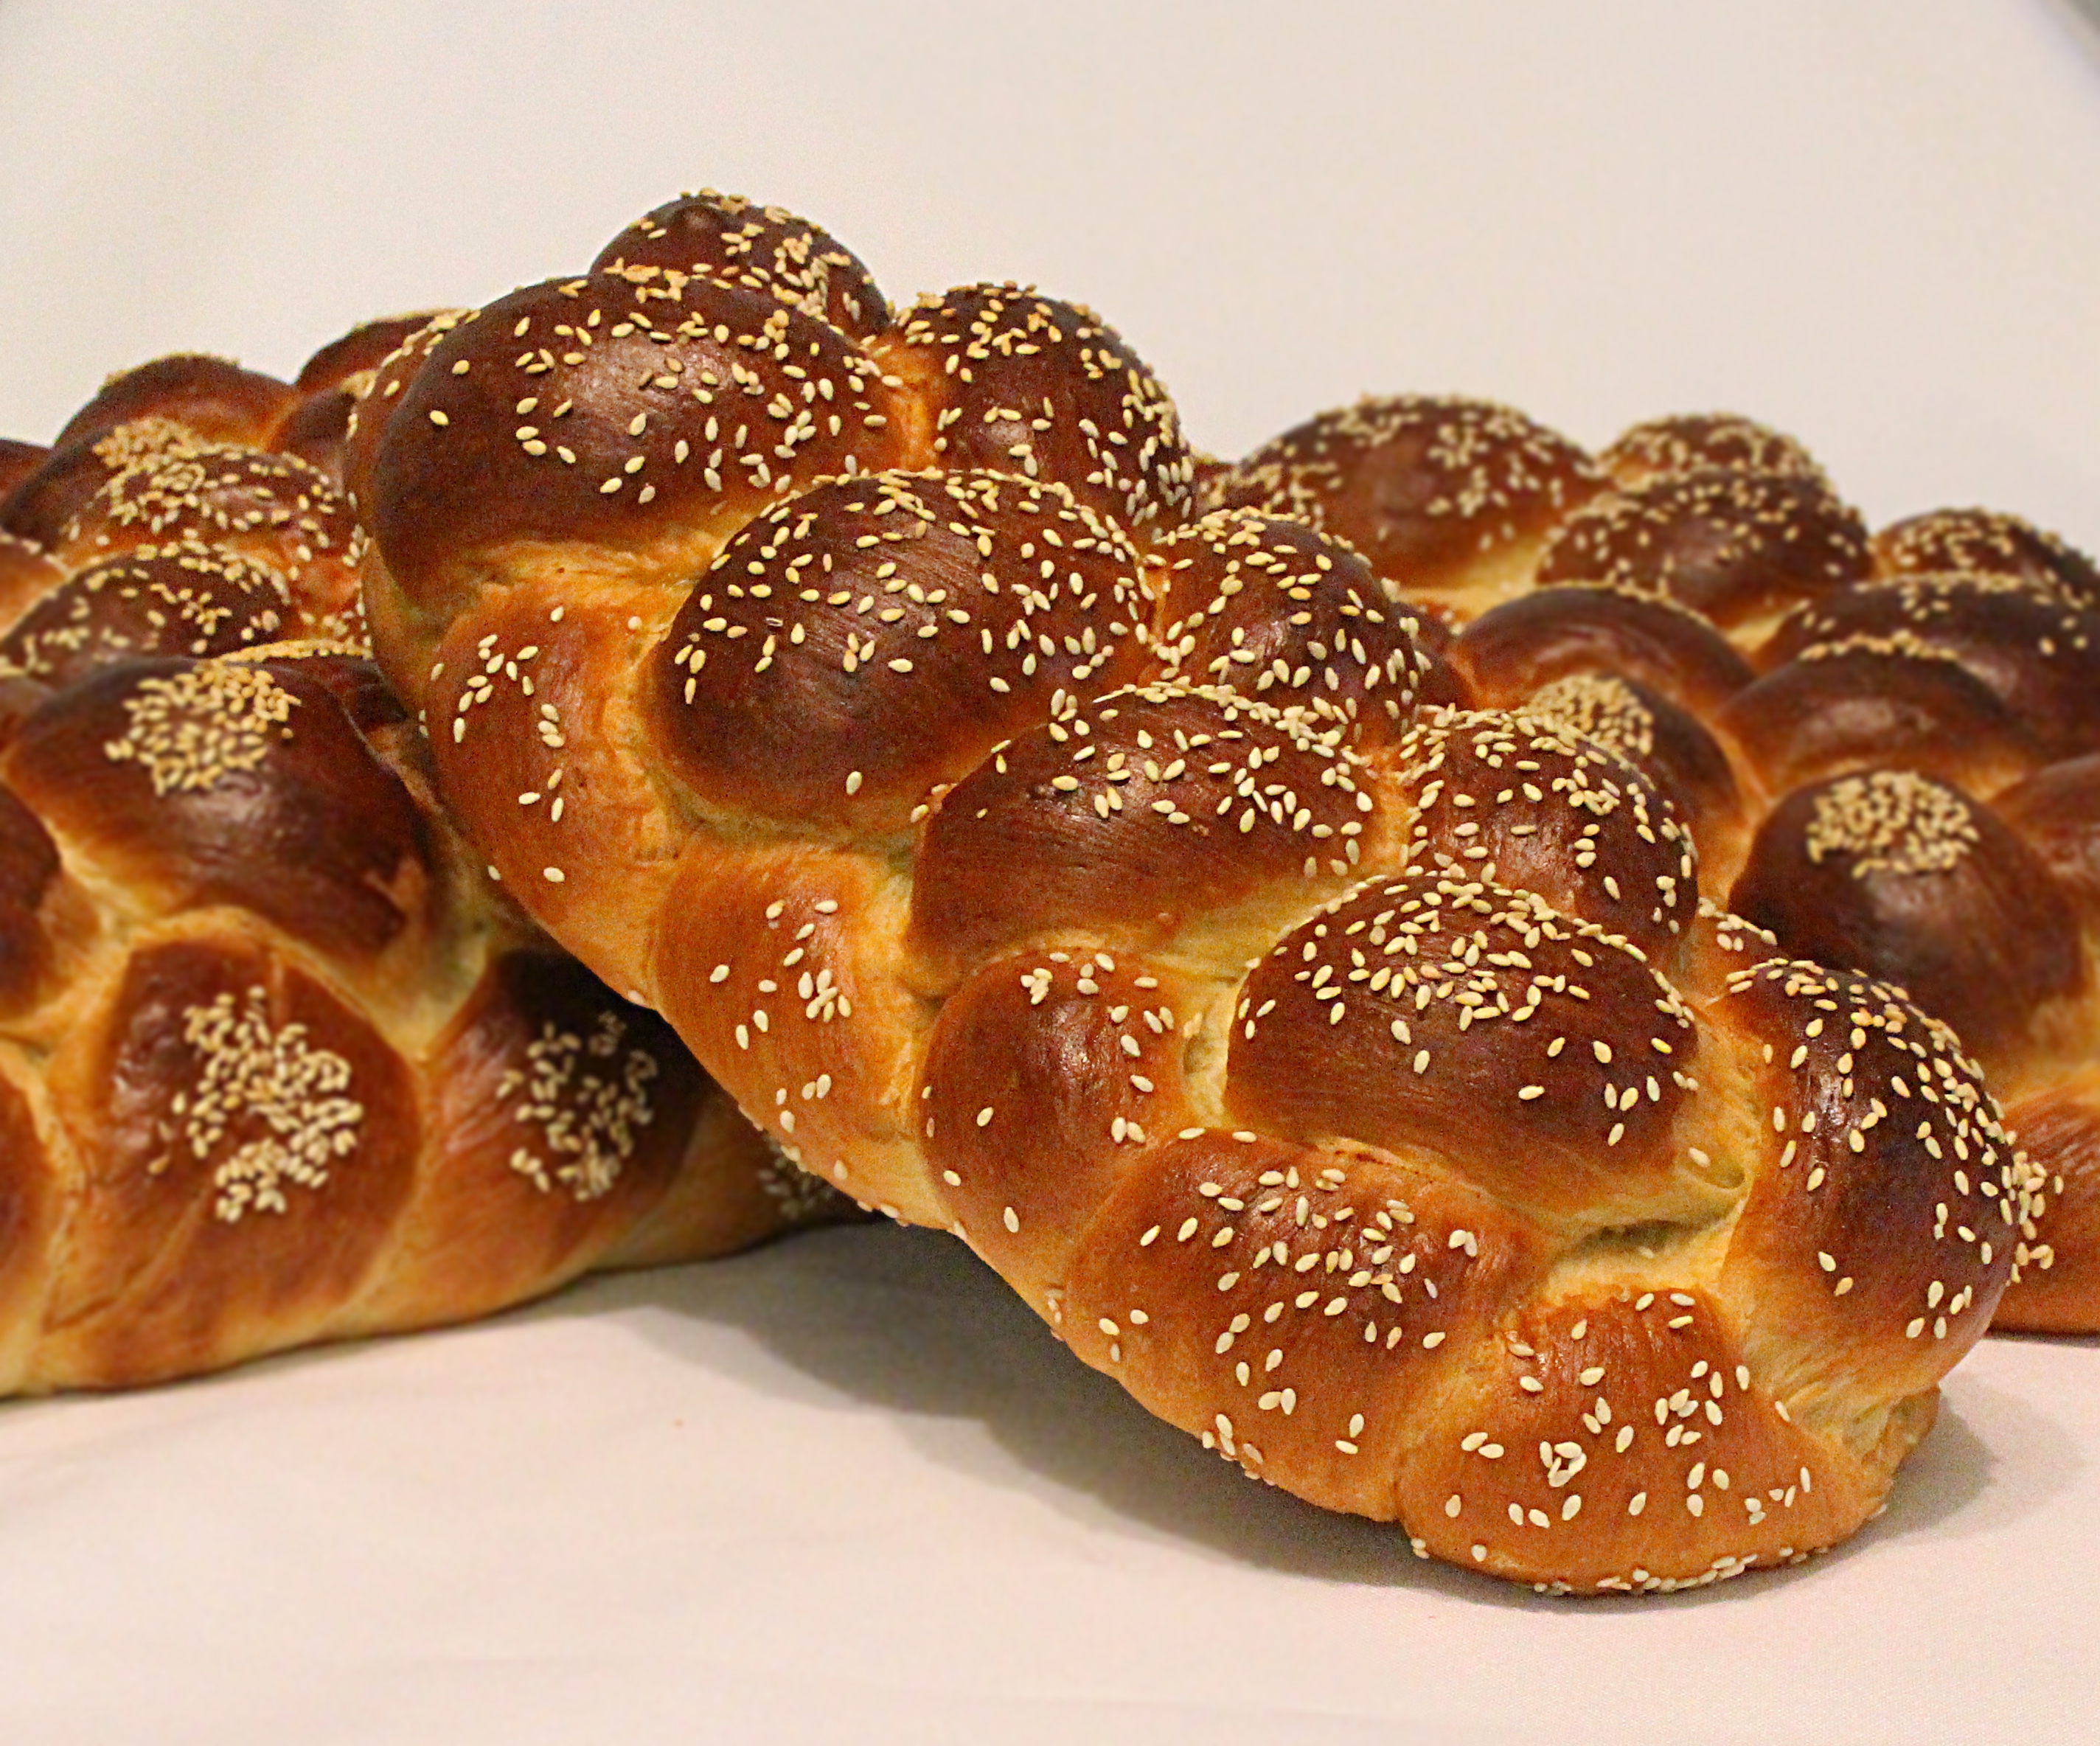 How To Make Challah Bread (Easy Step-by-Step Guide)